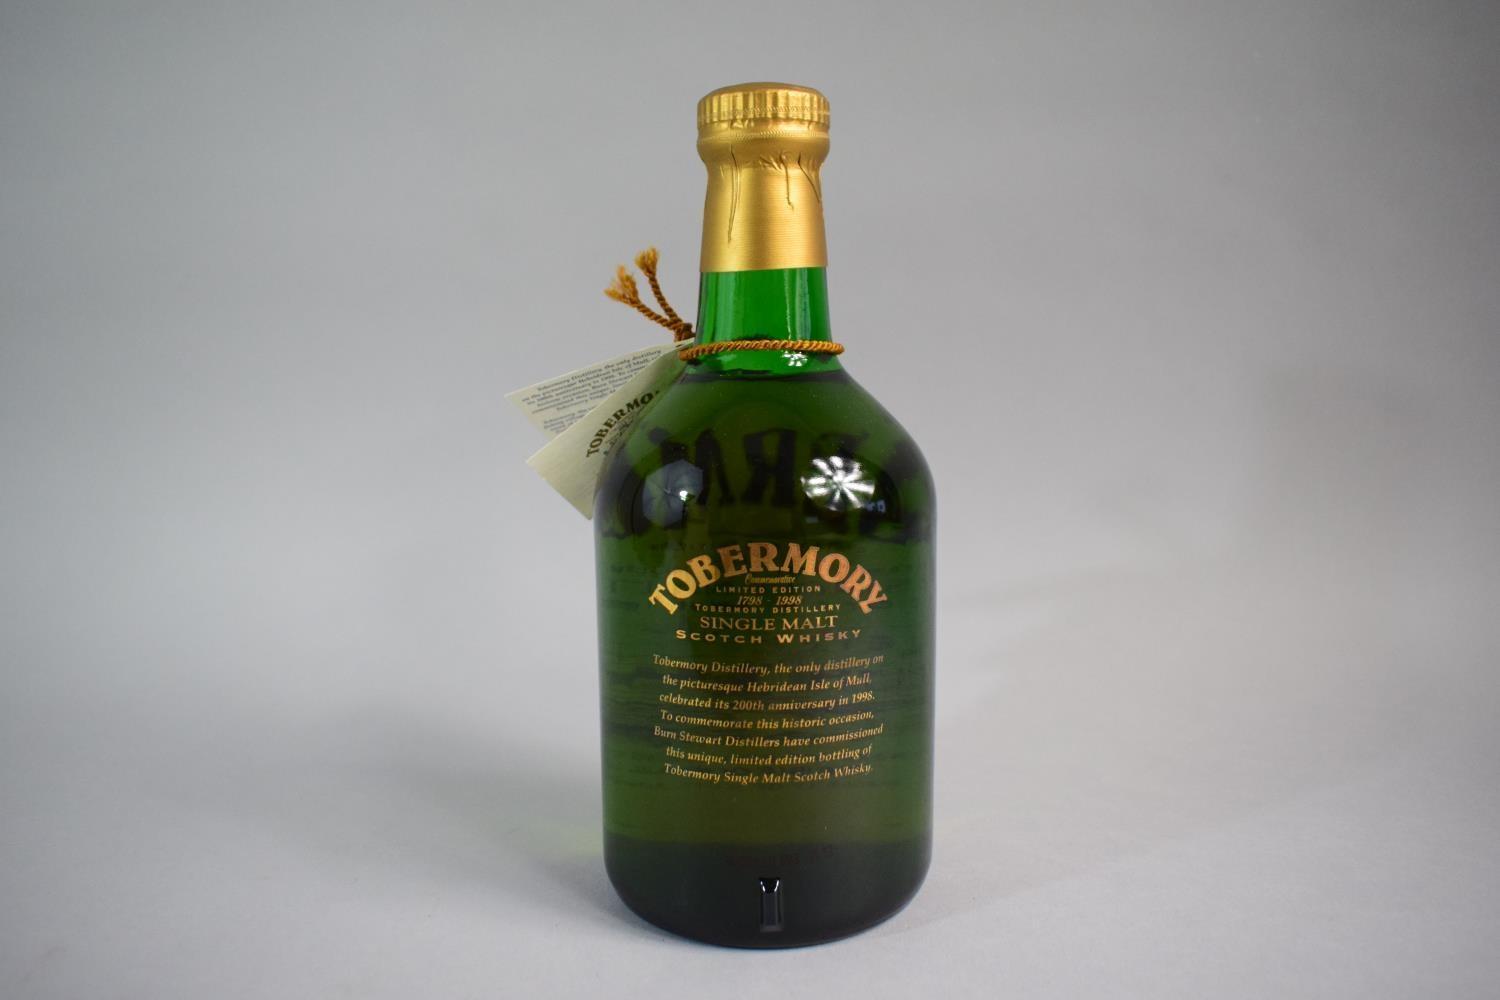 A Single Bottle of Malt Whisky - 1998 Tobermory Collectors Limited Edition, for BiCentenary. No 1747 - Image 3 of 3